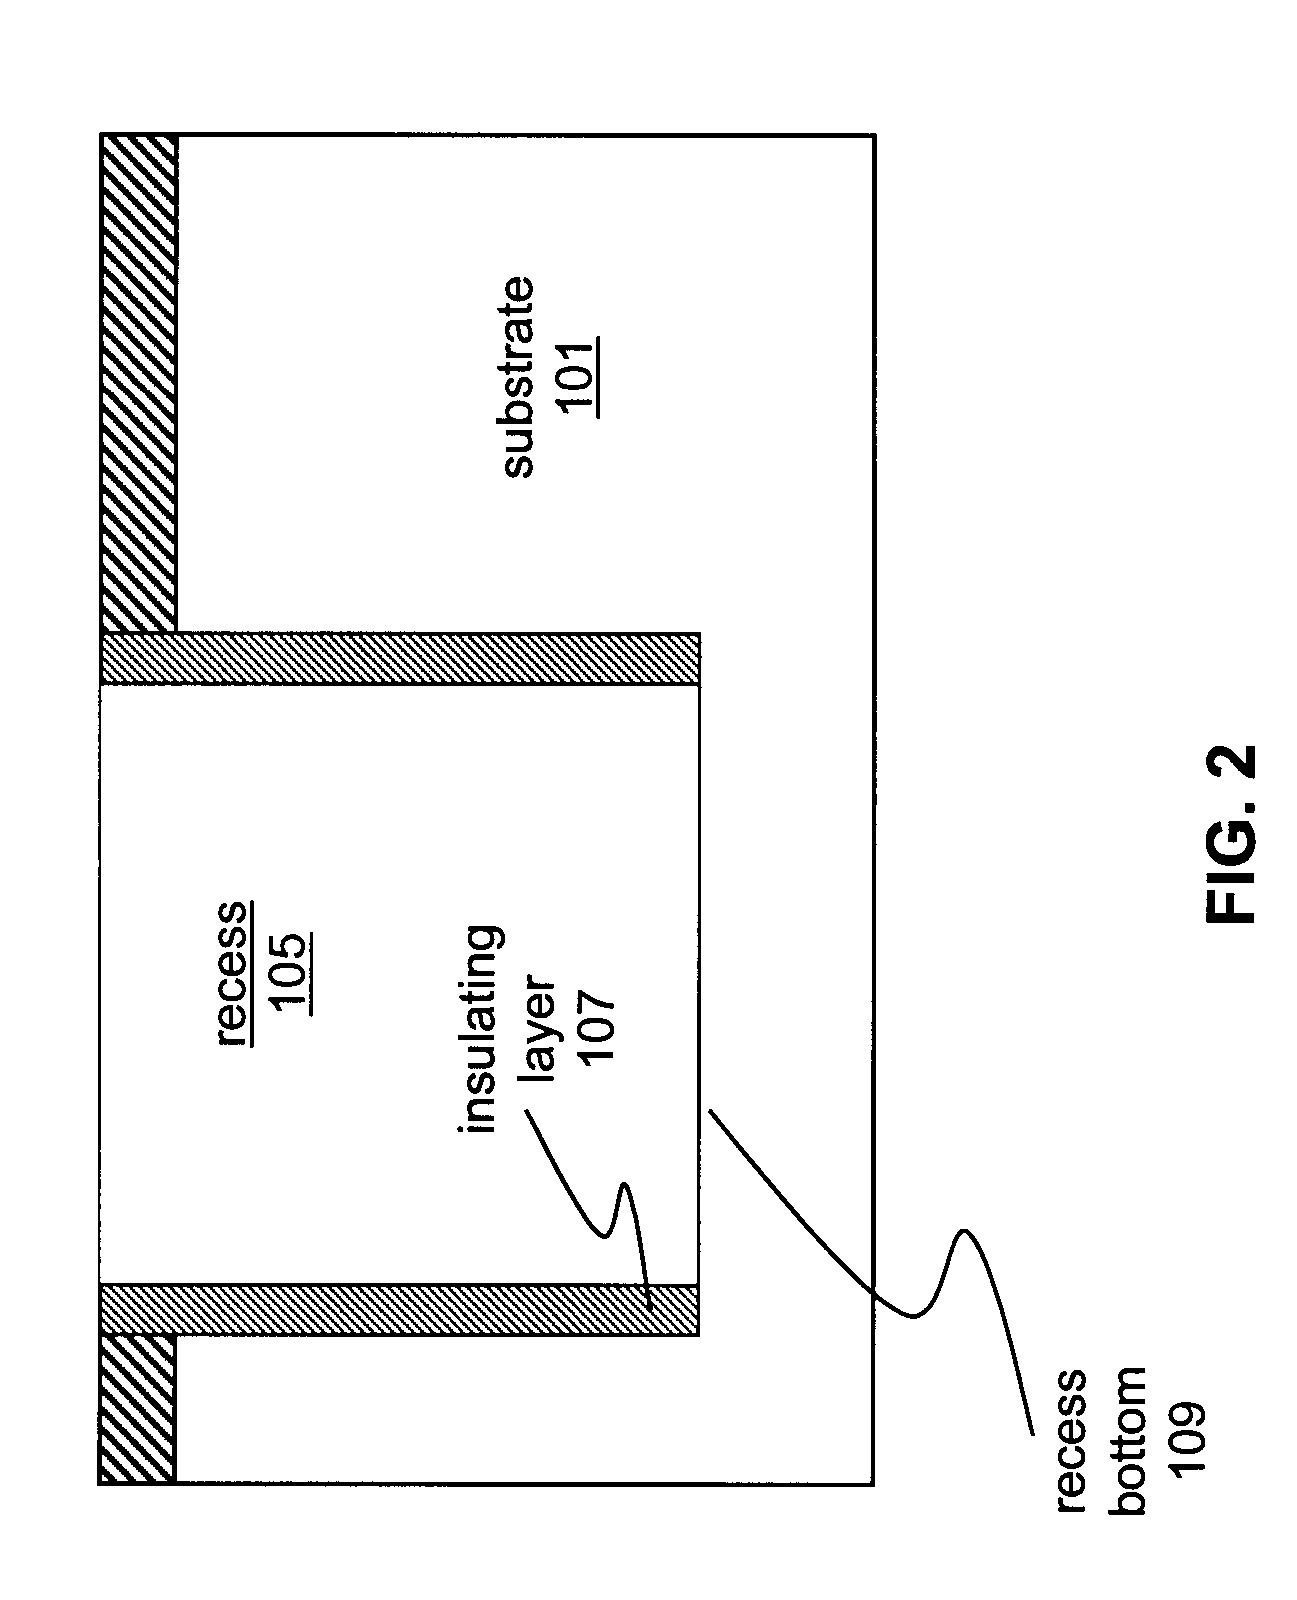 Patterned strained semiconductor substrate and device